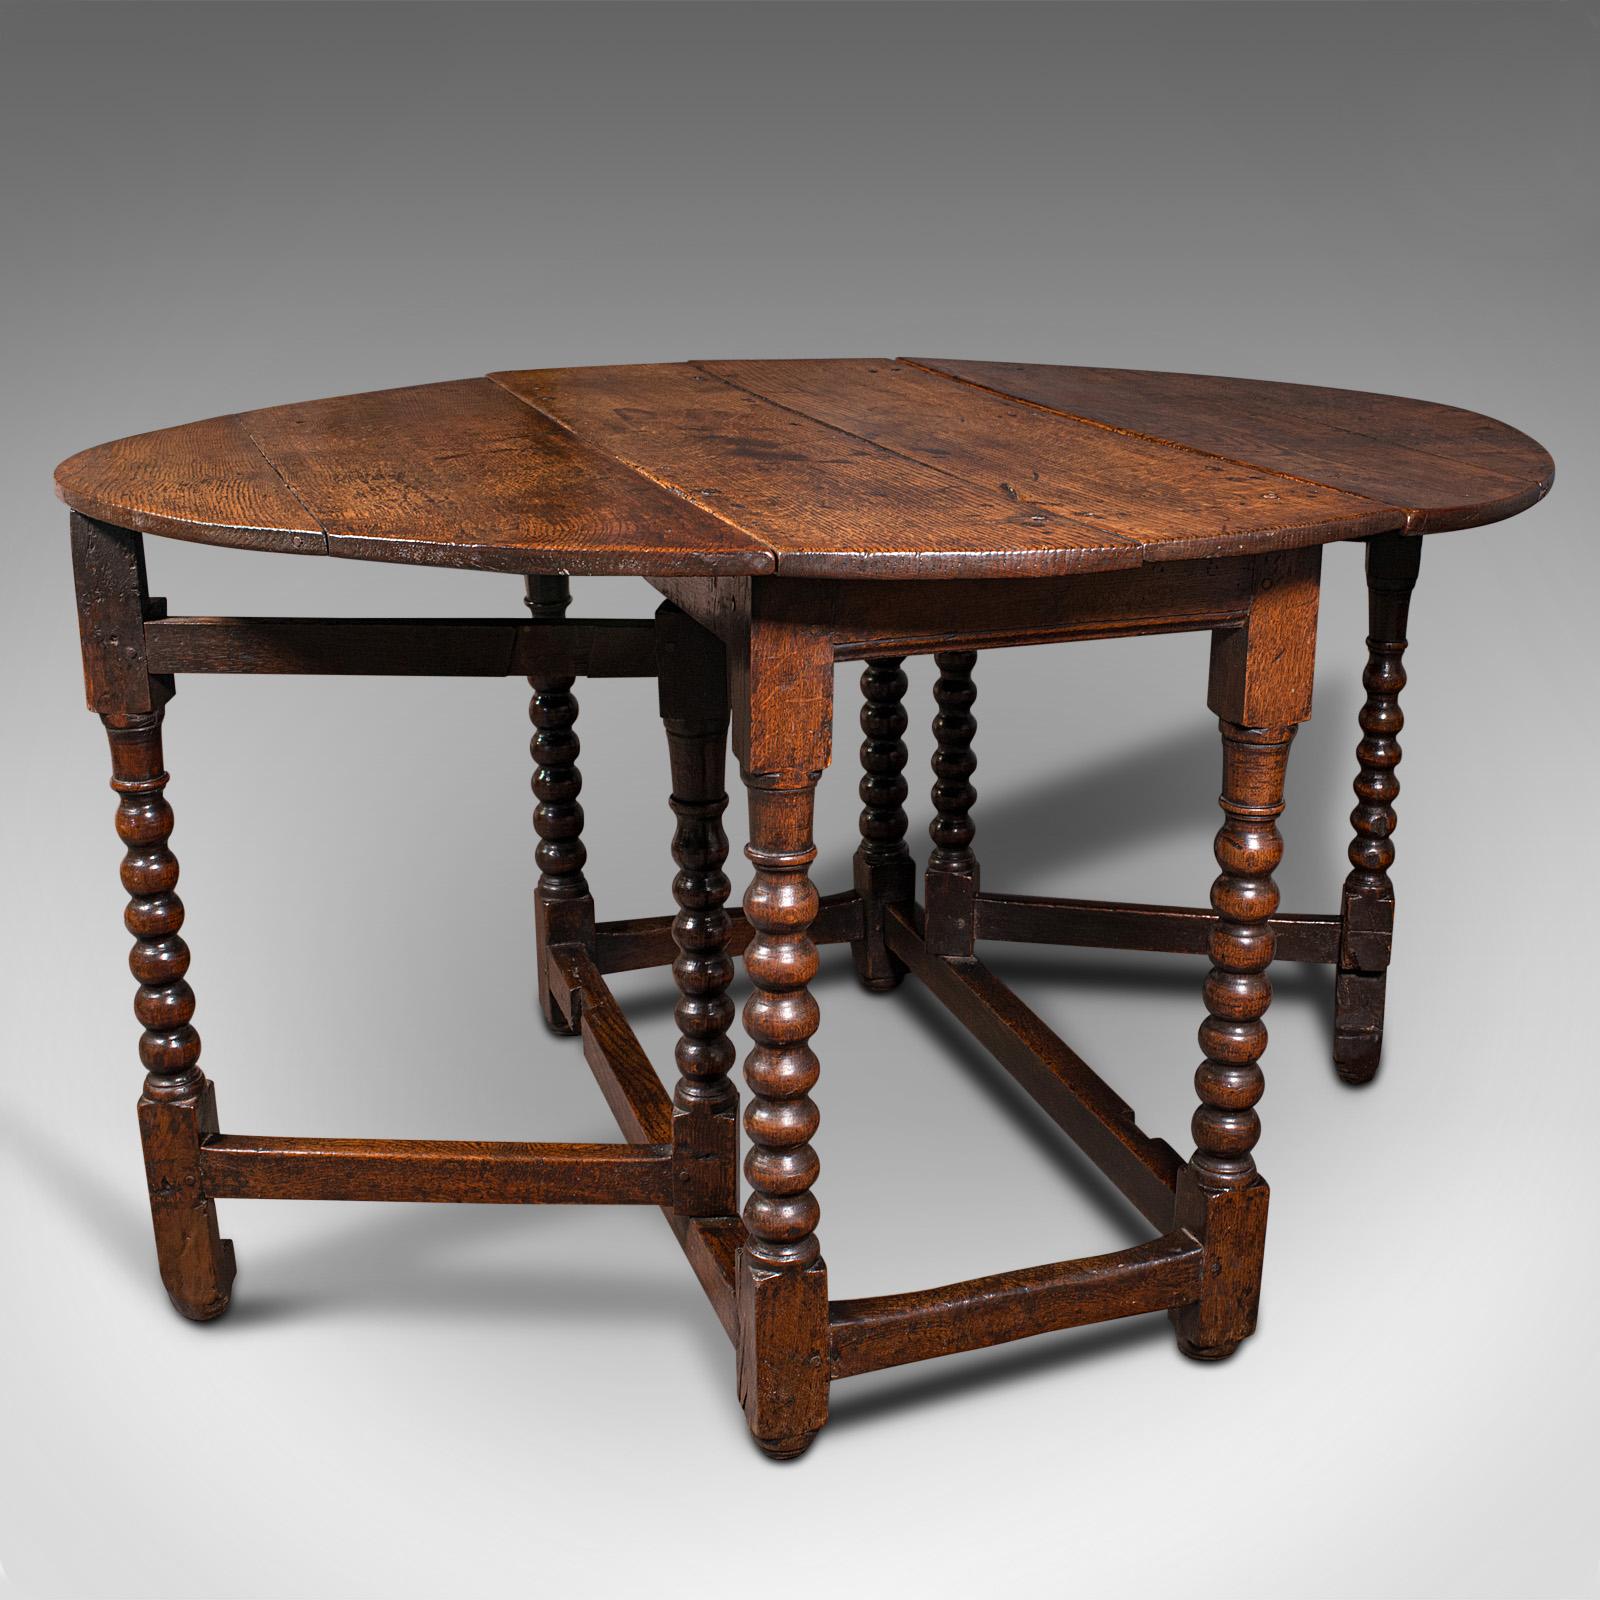 This is an antique gate leg table. An English, oak oval extending provincial table, dating to the William III period, circa 1700.

Delightfully presented table, as useful today as it was over 300 years ago
Displaying a desirable aged patina and in